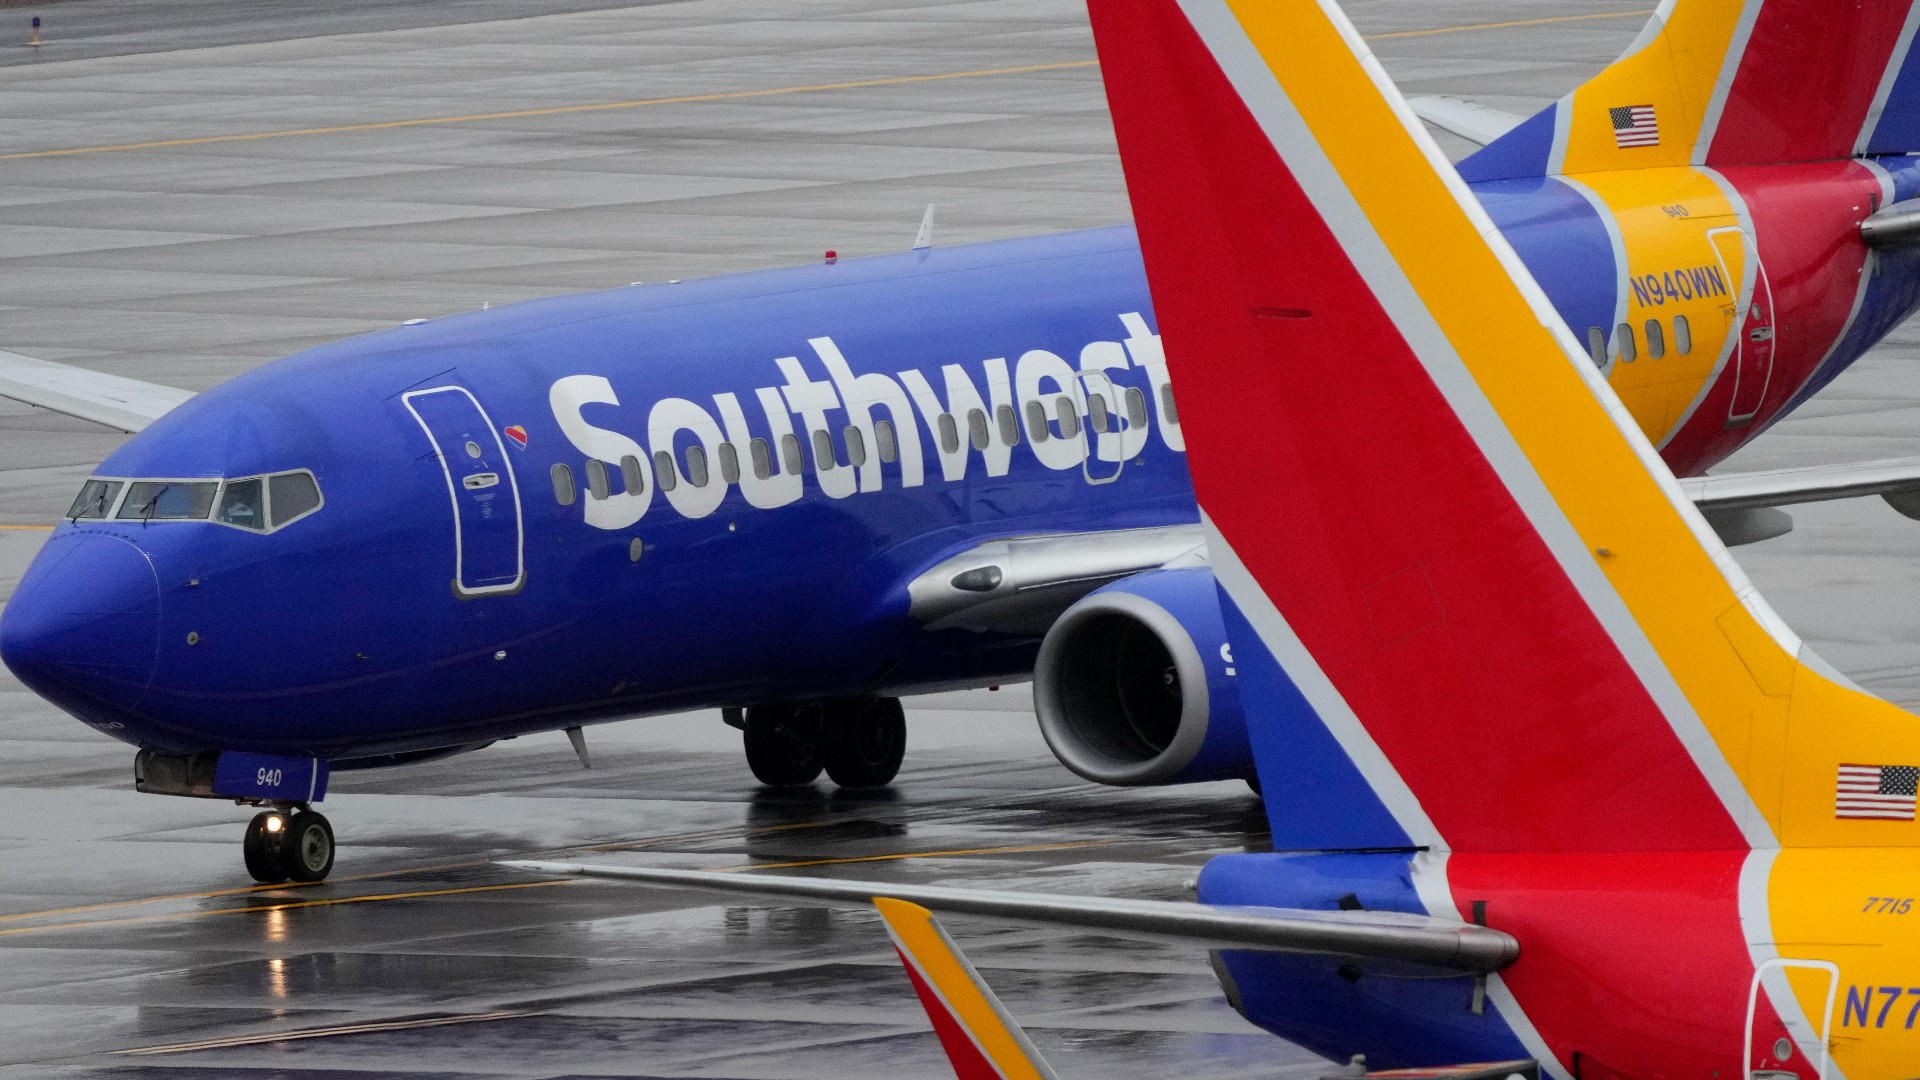 ​Southwest said that "the captain declared an emergency to deviate from the filed flight plan and requested that paramedics be available when the aircraft arrived."